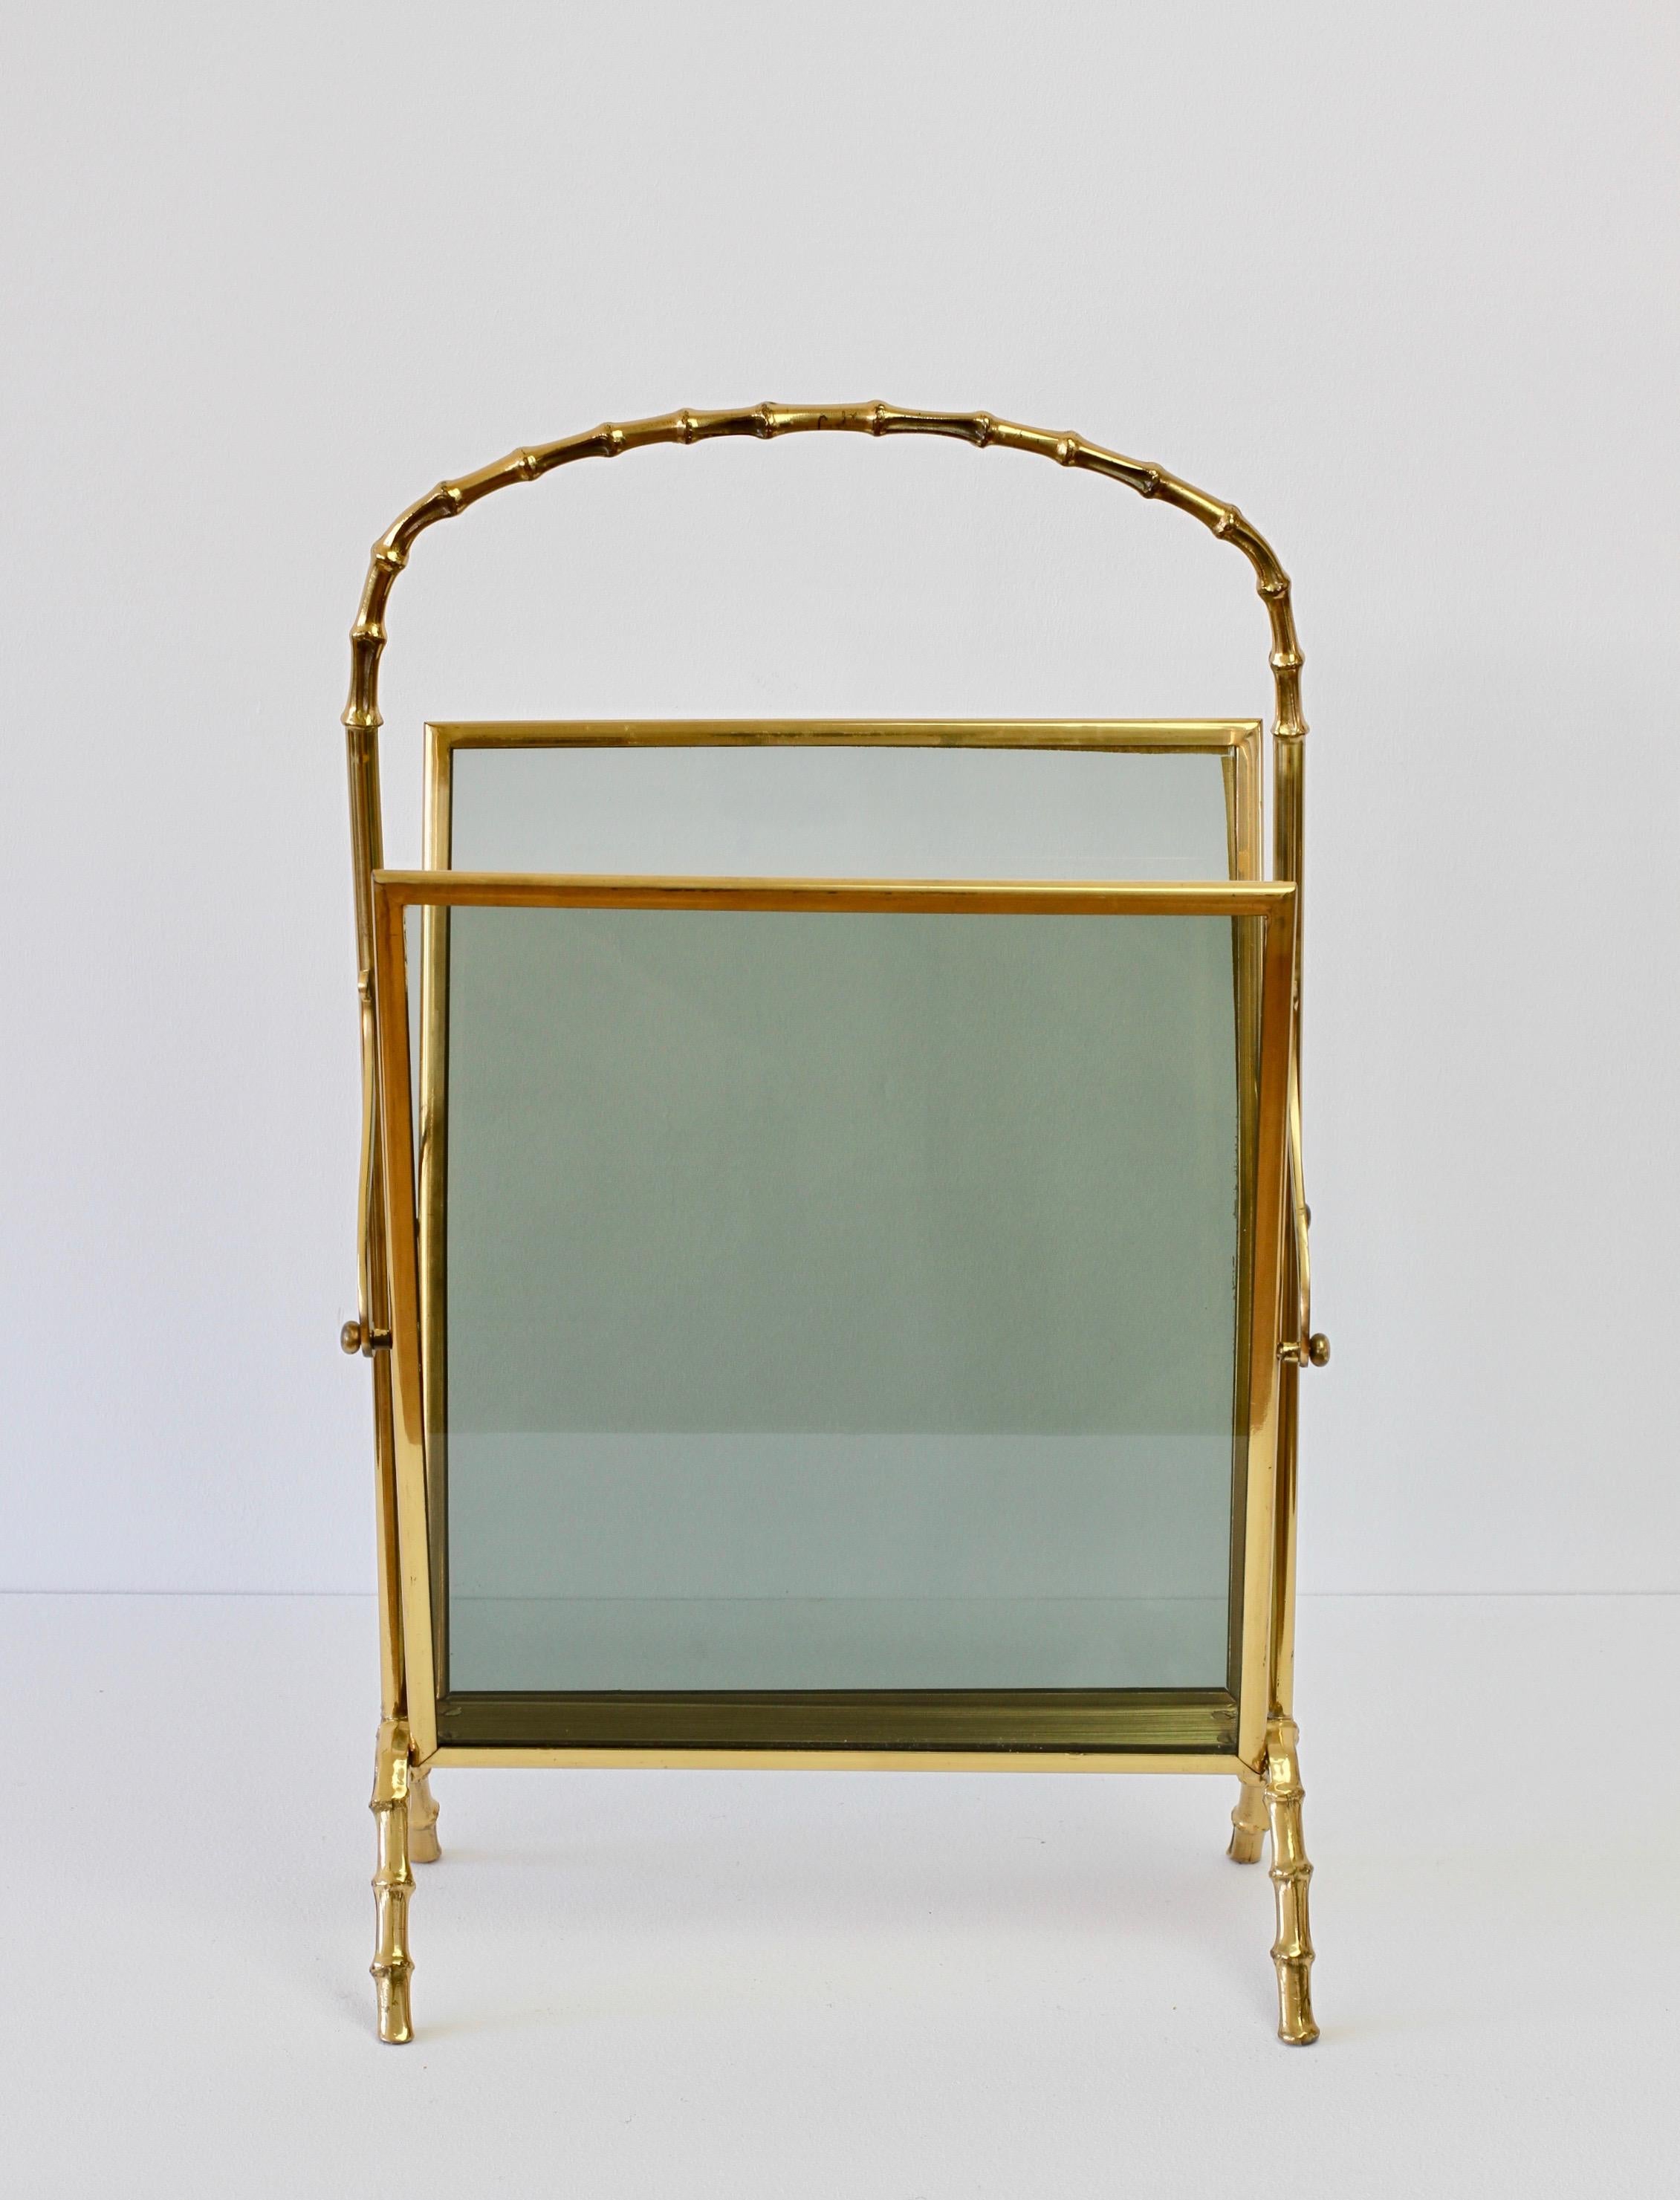 Maison Baguès attr. Cast Brass Faux Bamboo Magazine Rack or Newspaper Stand 1